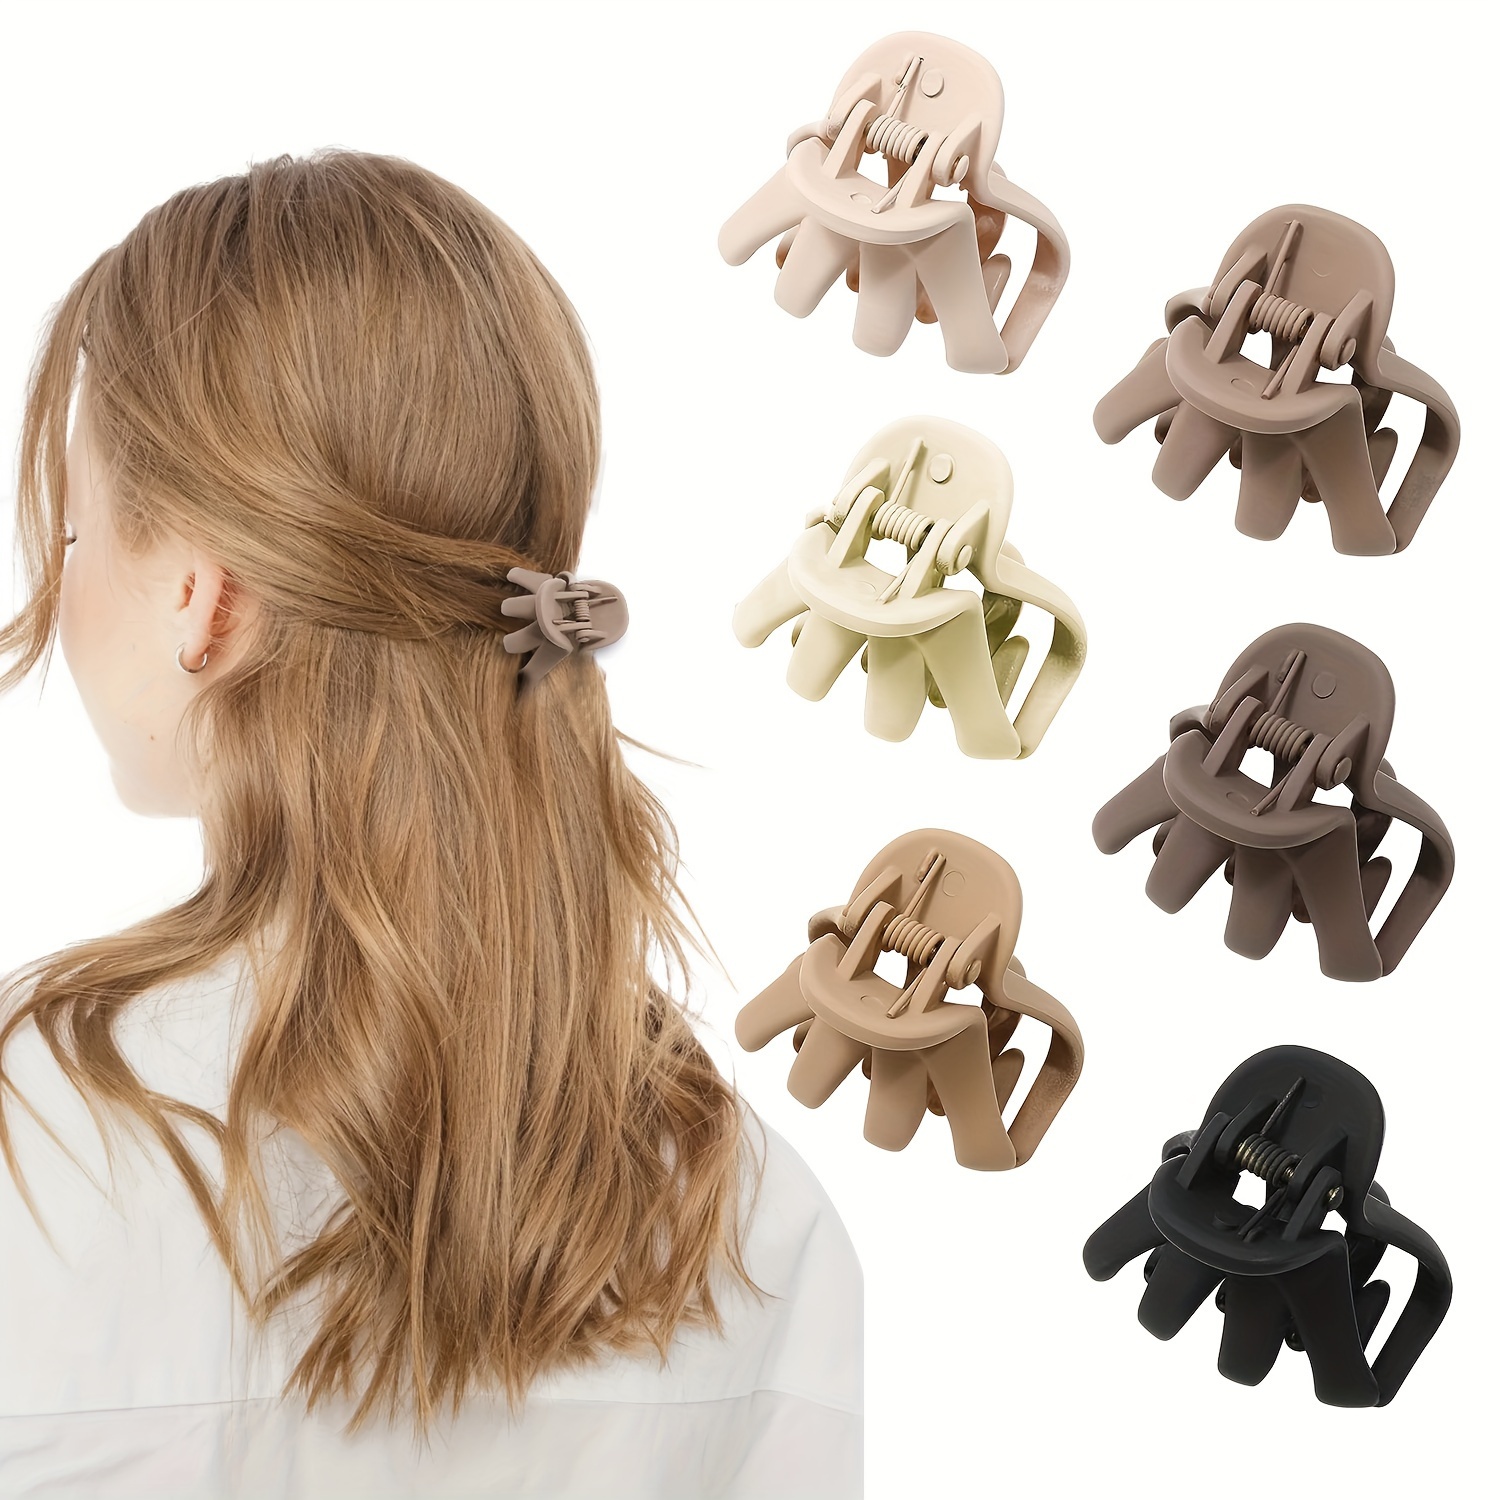 

6pcs Small Hair Clips For Women Octopus Small Claw Clips 1.57 '' Nonslip Jaw Clip For Thin Thick Hair Strong Hold Hair Claw